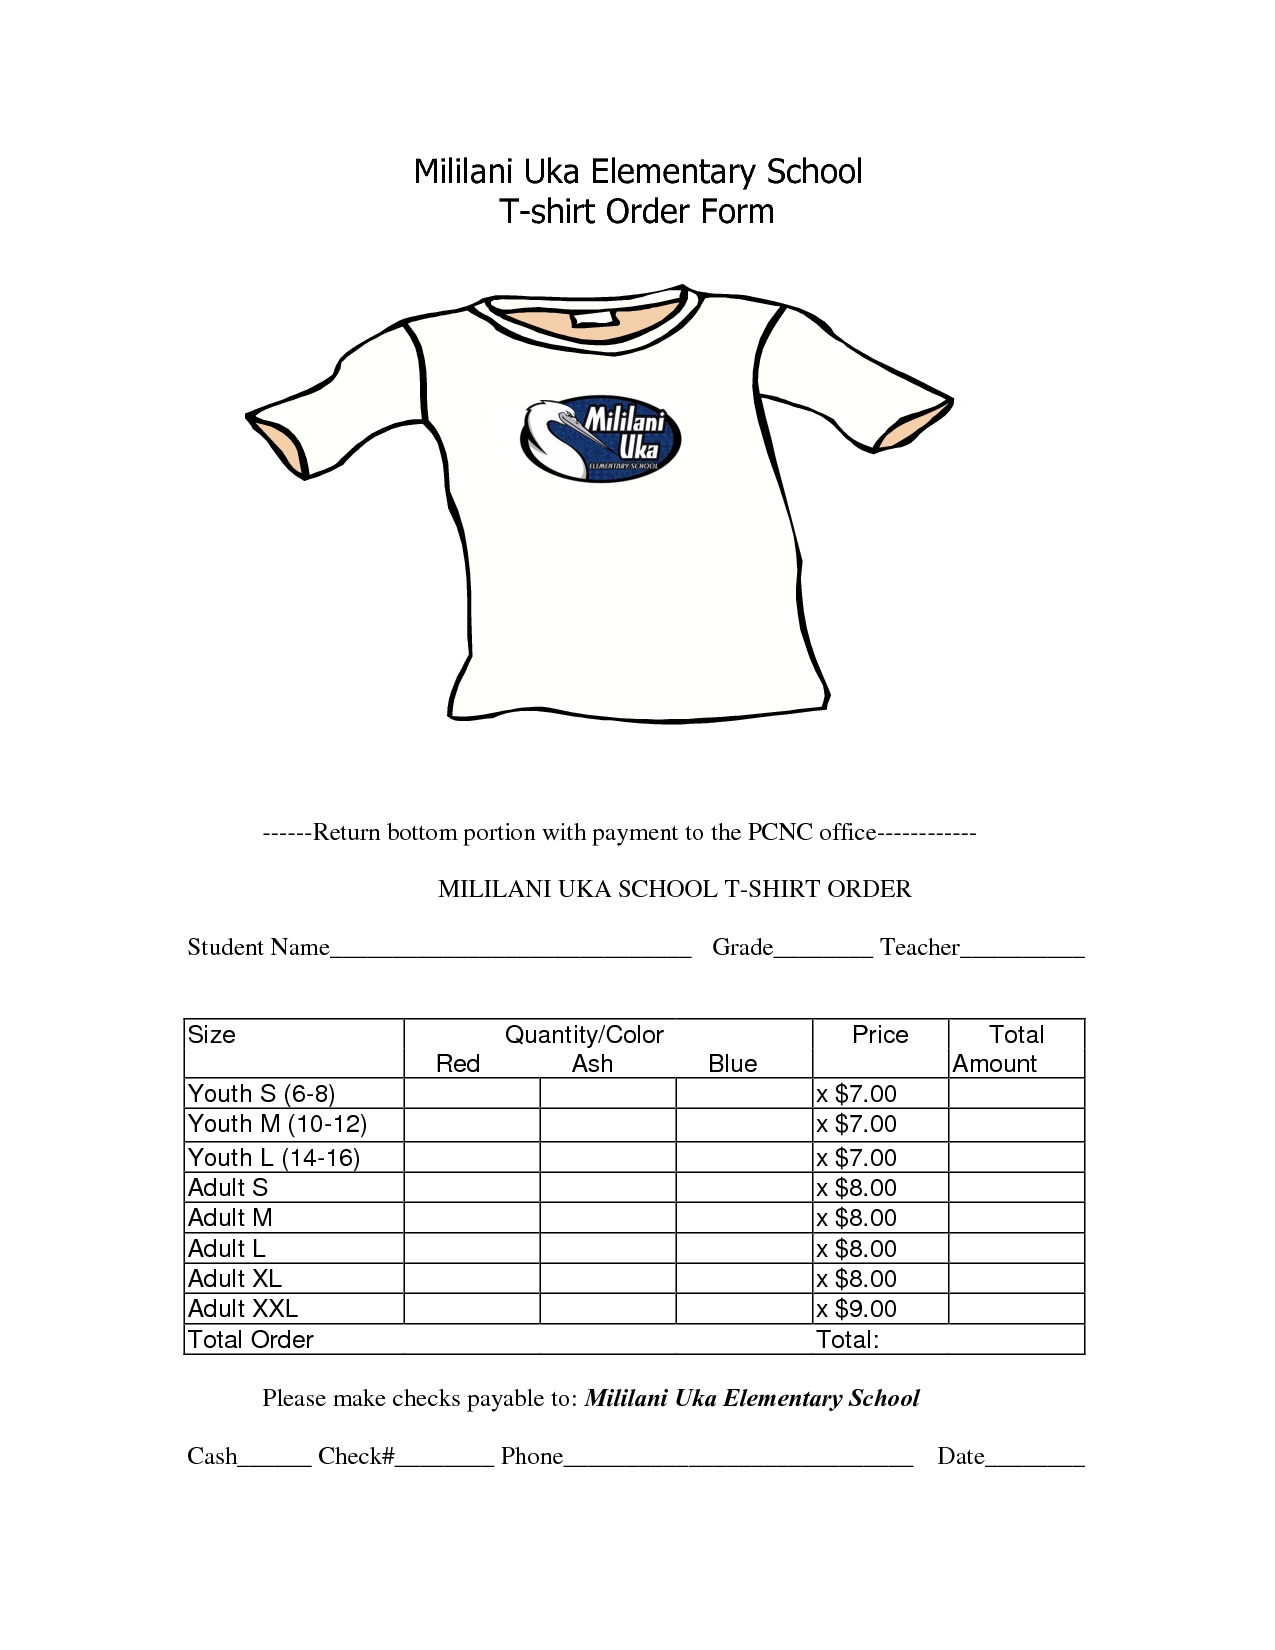 school t shirt order form template order form template commercial invoice for tshirt